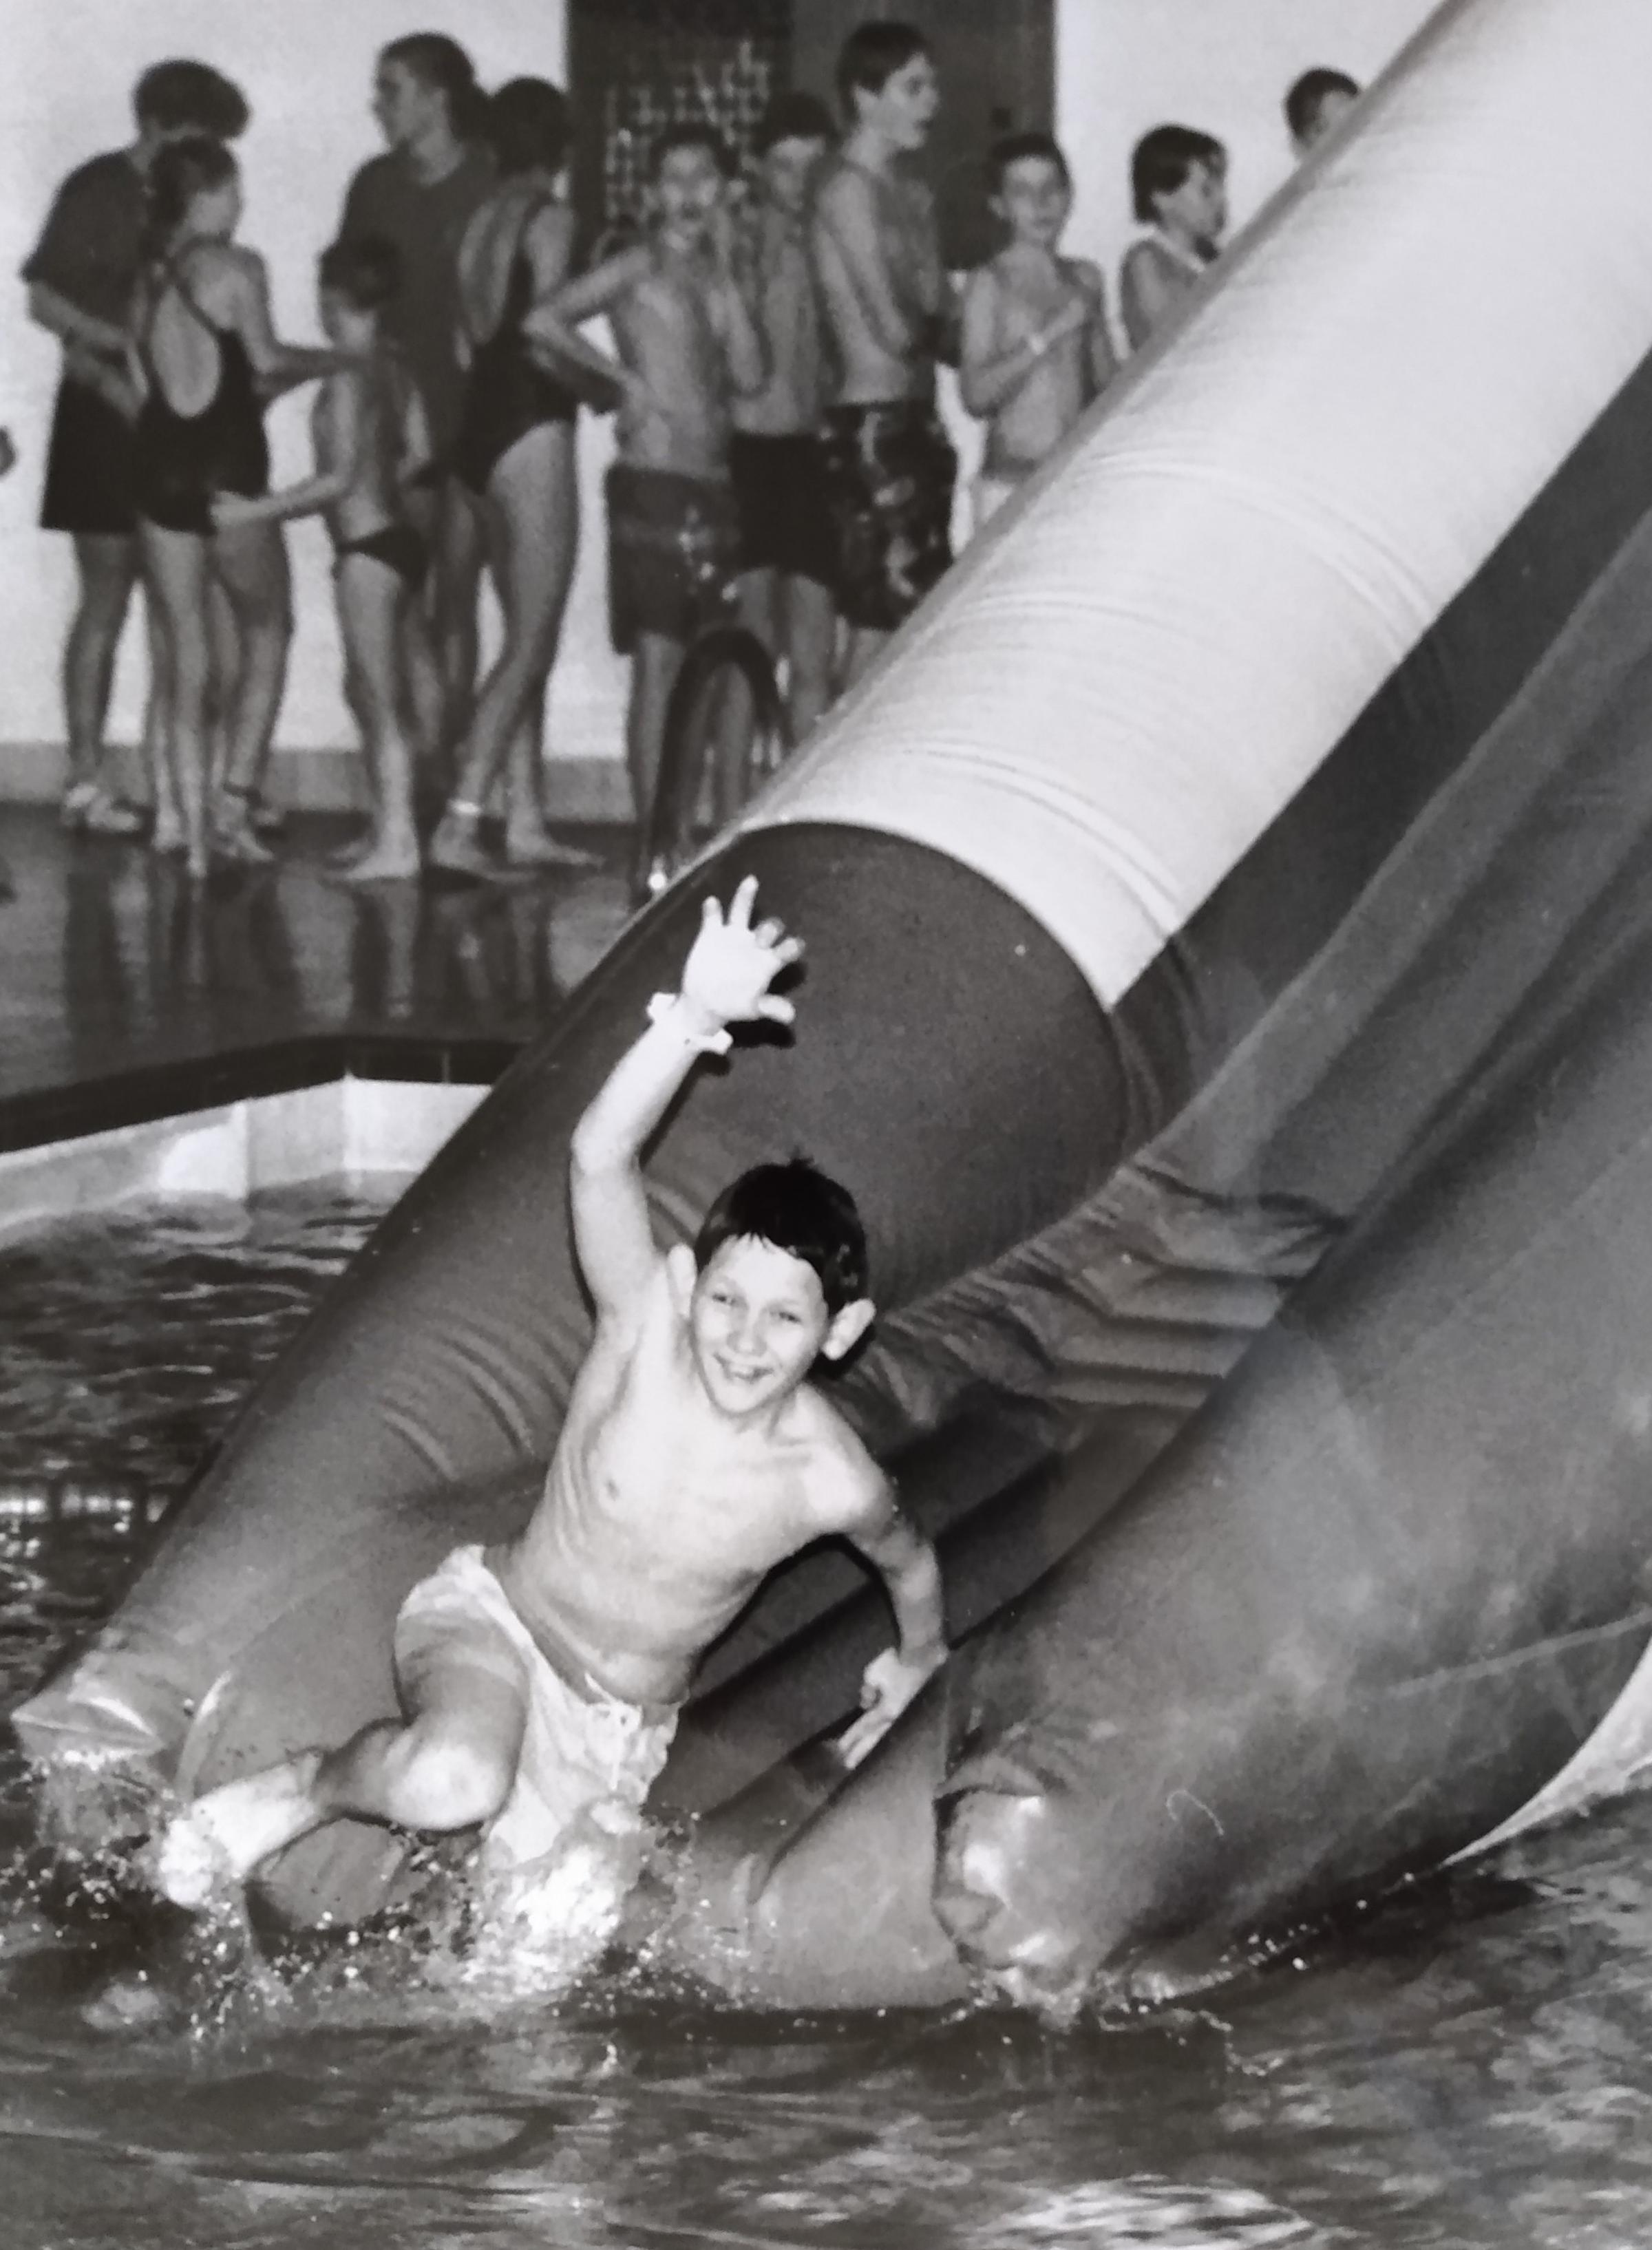 January 1992 and one youngster comes shooting down the newly installed slide